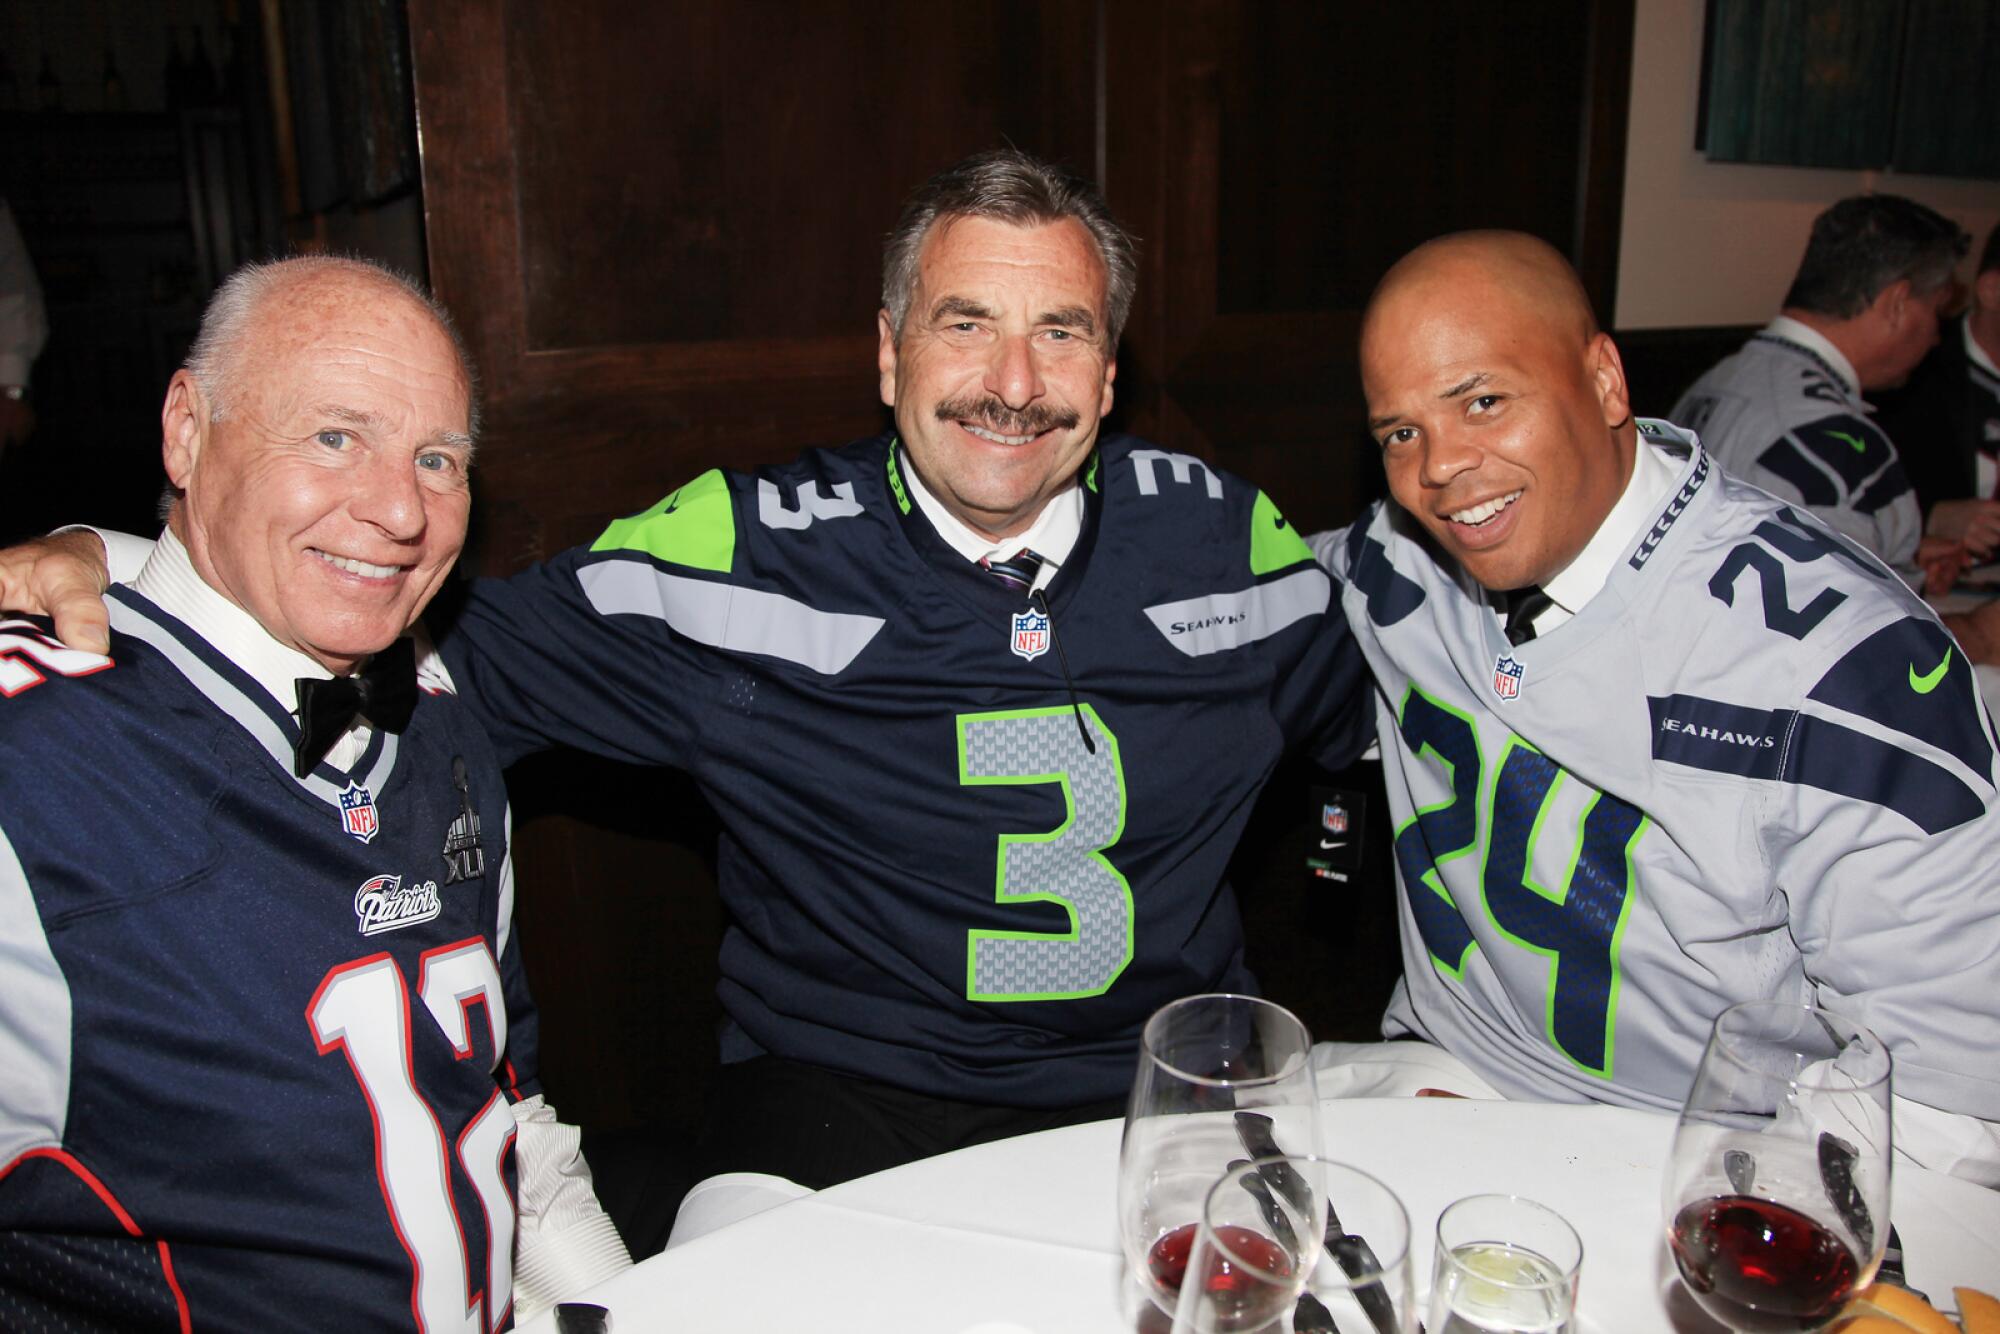 Tom Girardi, then-LAPD Chief Charlie Beck, and a secret Service at annual Super Bowl party hosted by Girardi in 2015.